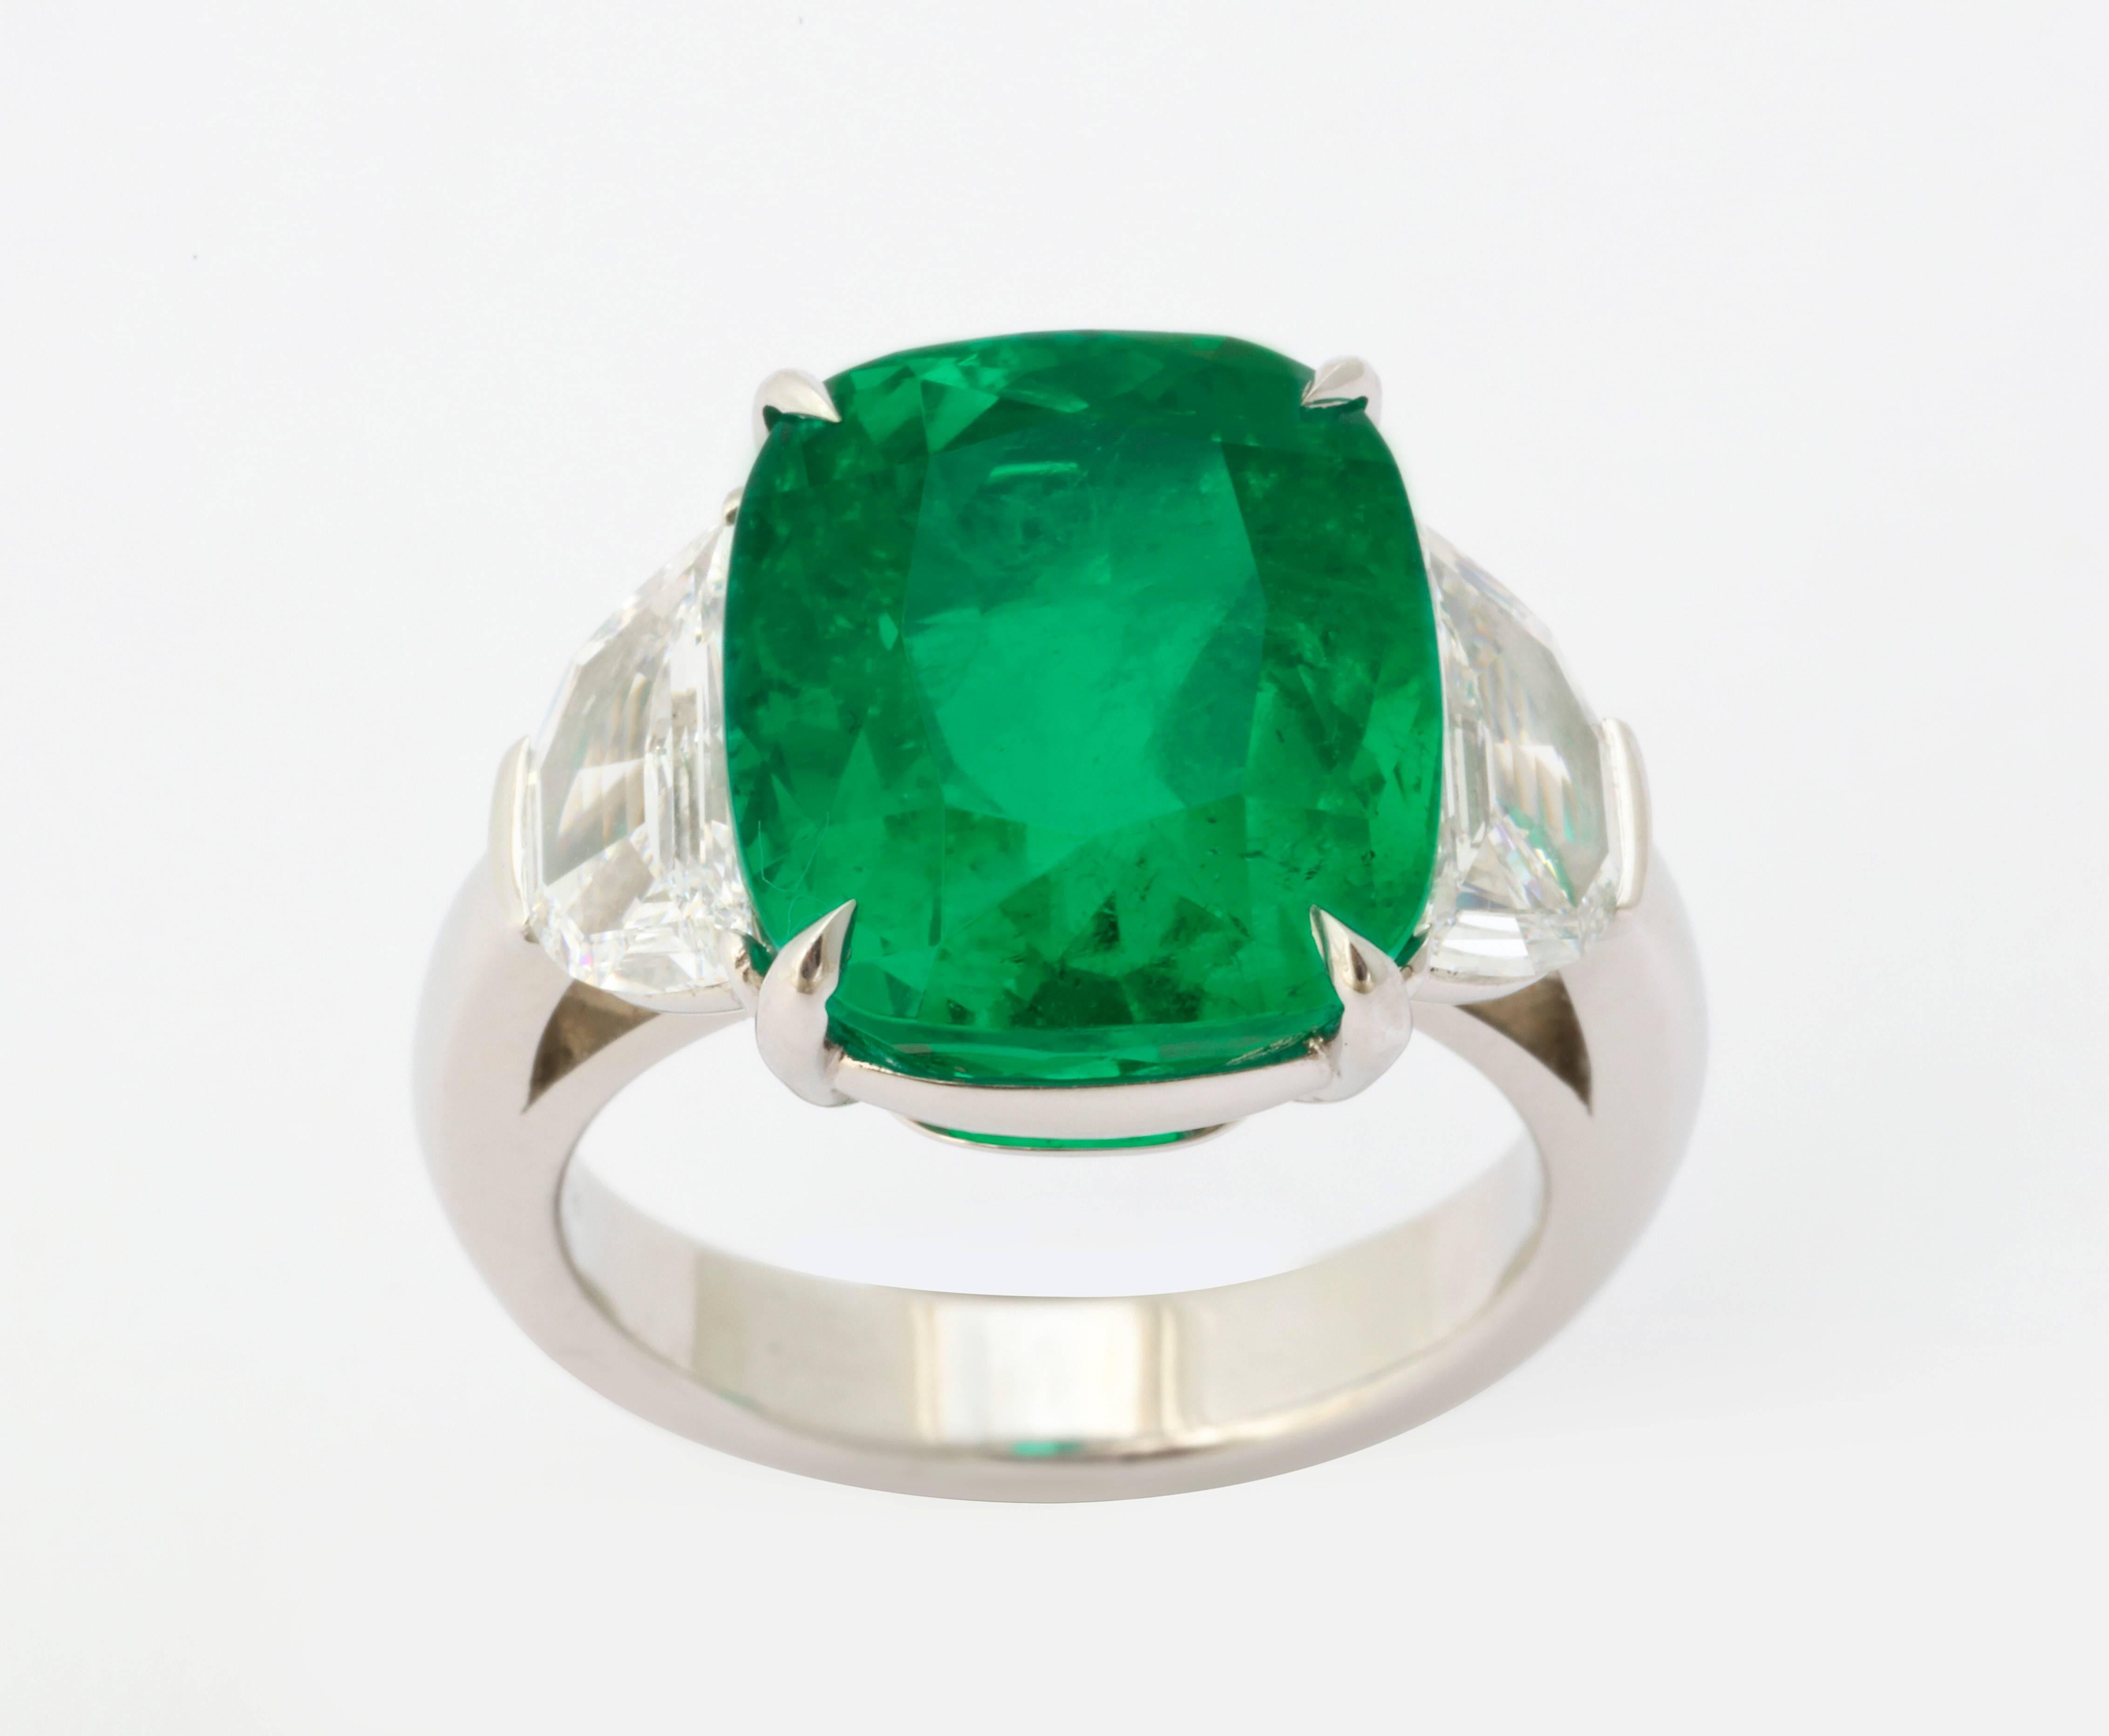 The perfectly cut cushion shape emerald weighs 9.15 carats and is exquisitely set in platinum, flanked by a pair of half moon diamonds weighing over 1 carat each (2=2.15cts total weight).  The gemological certificate is from the highly esteemed